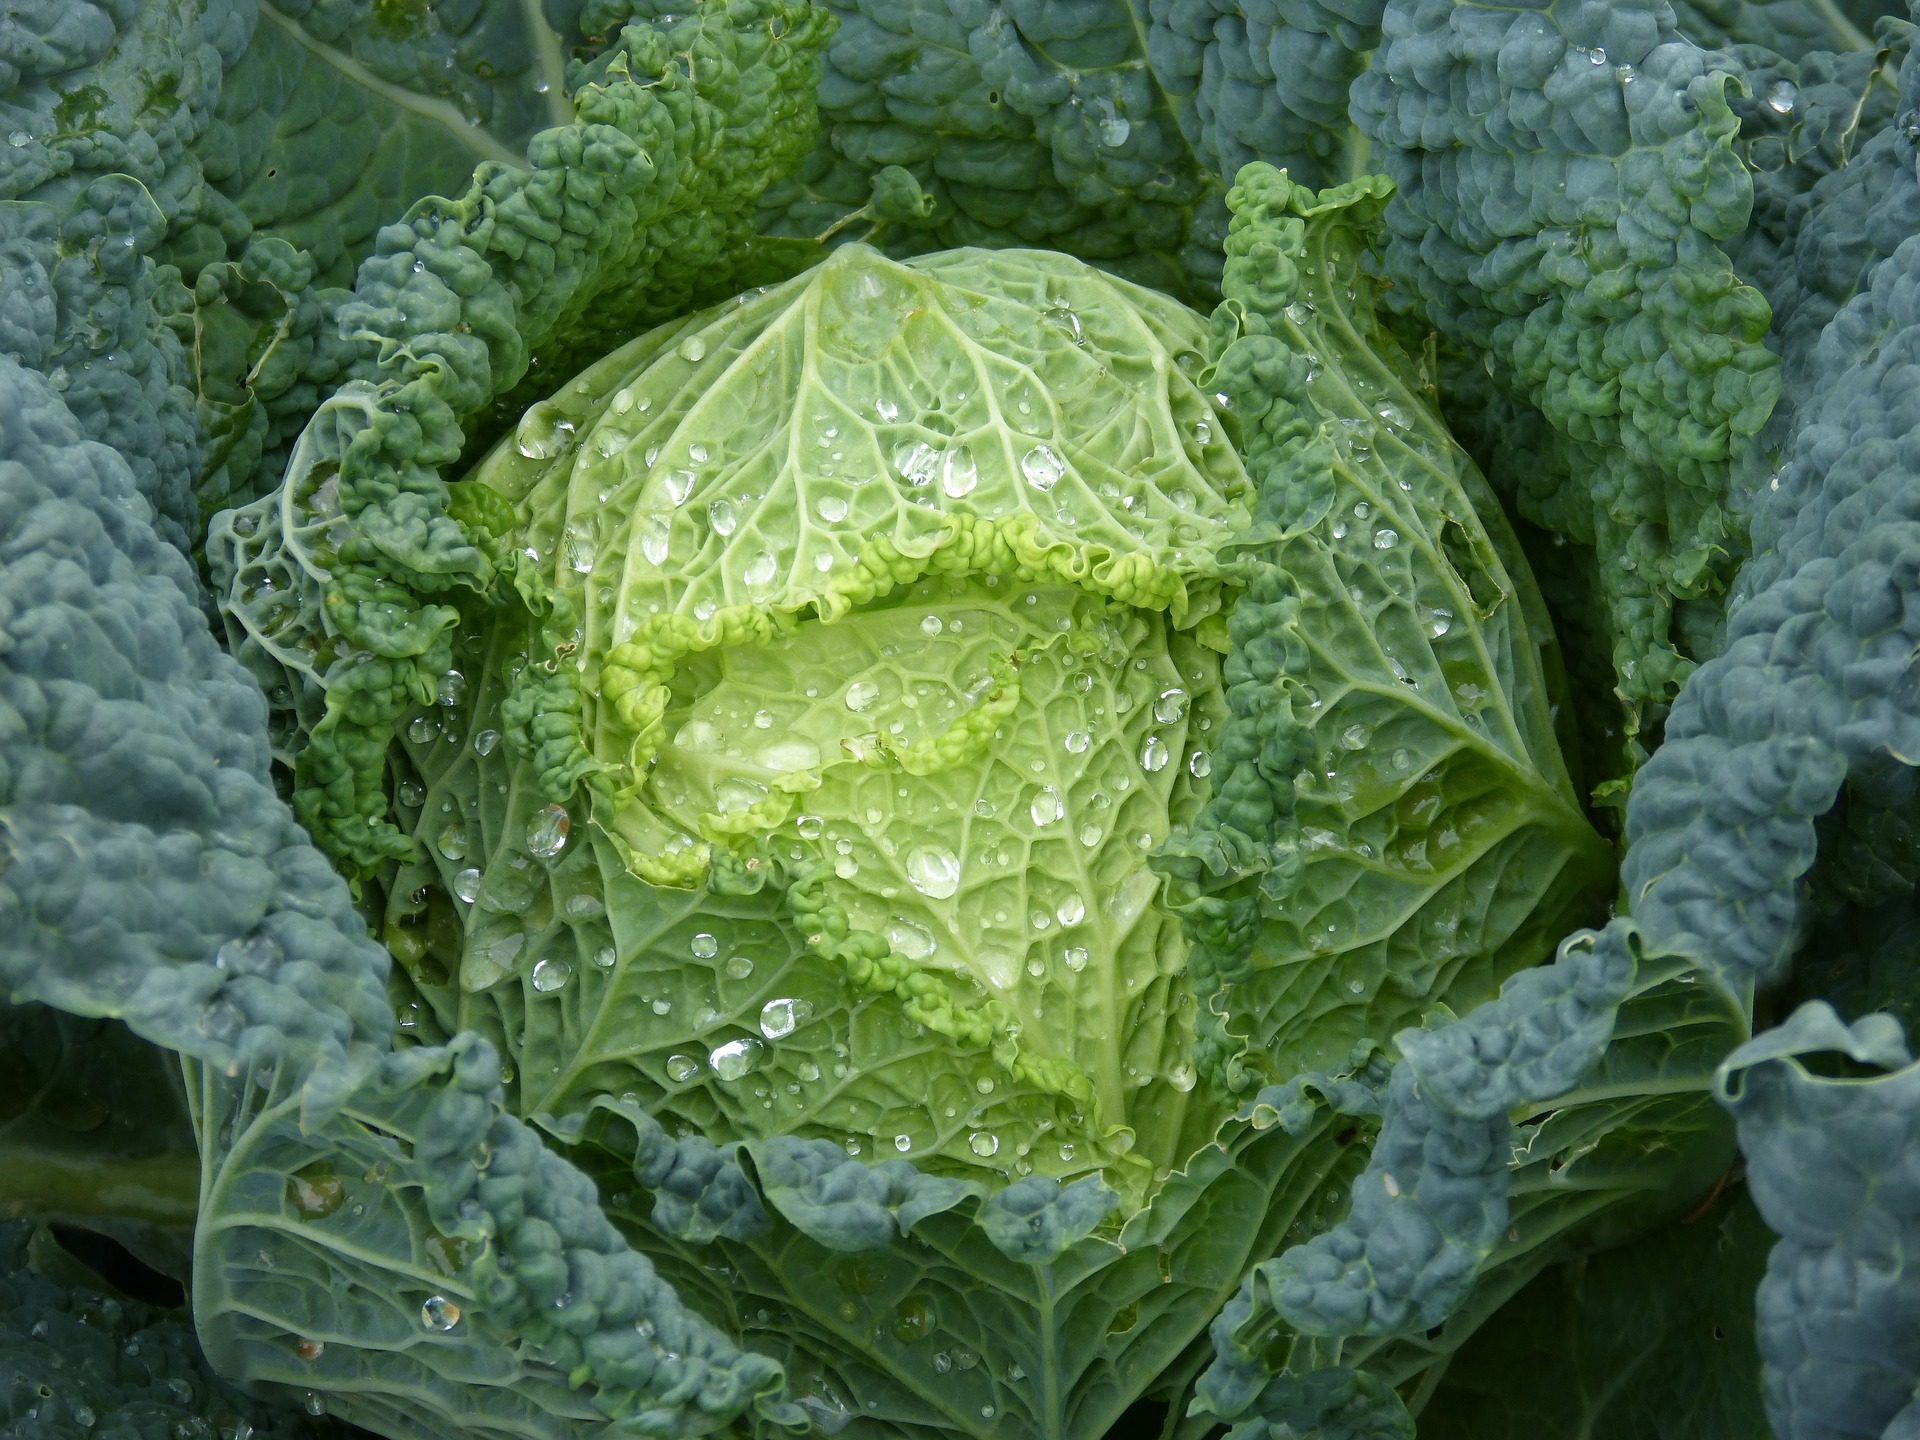 Cabbage Wallpaper Full HD Image